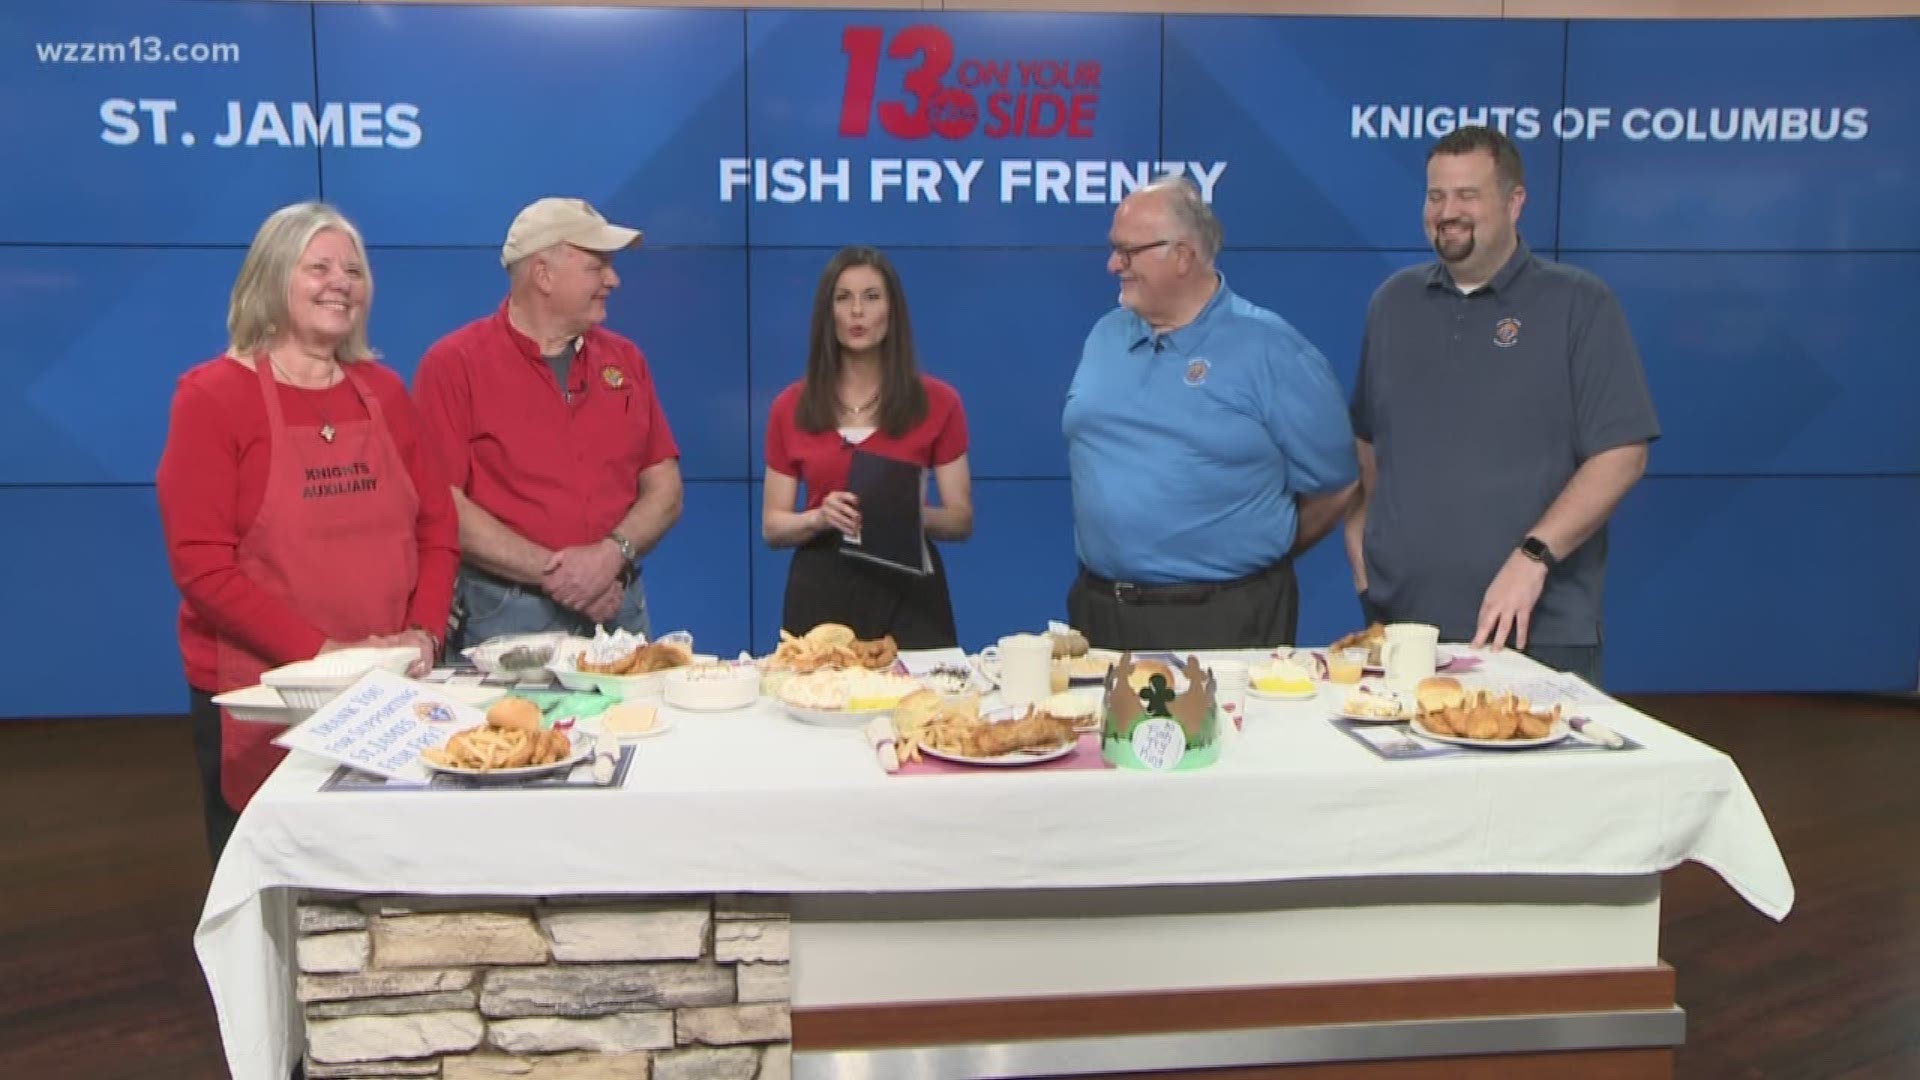 Lenten season is almost in the books. But there is still time to vote for the best fish fry in all of West Michigan.